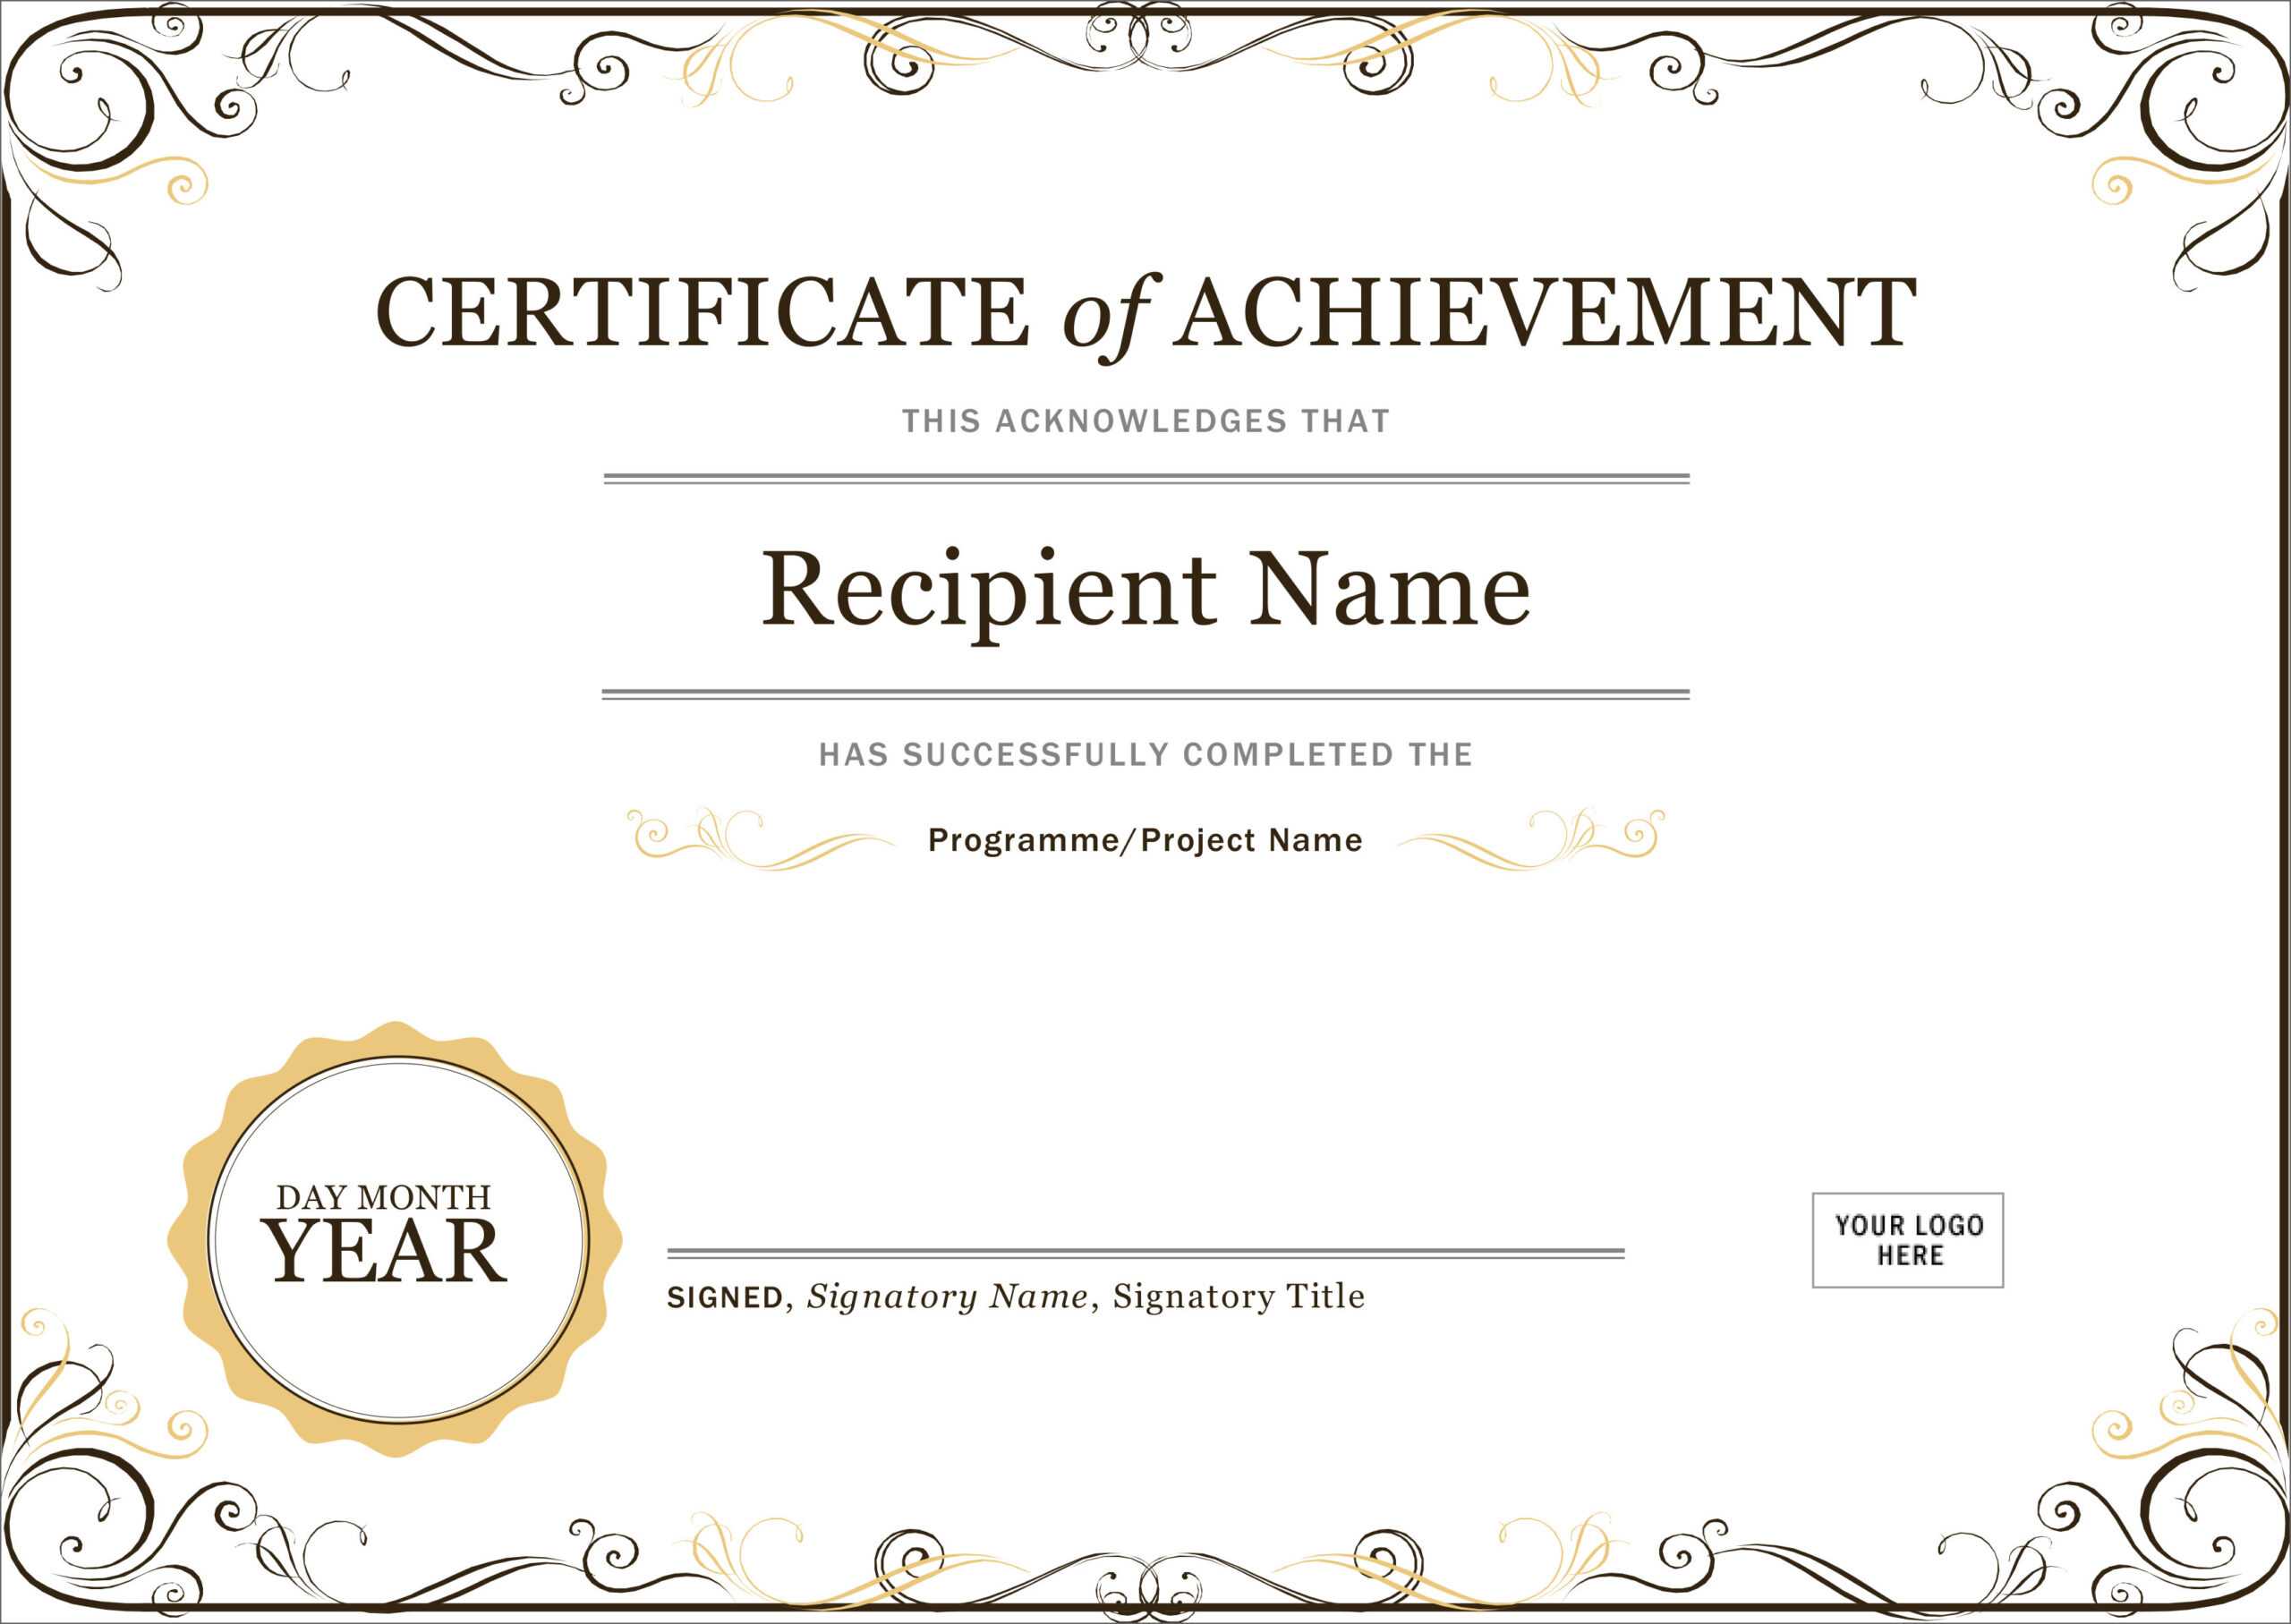 50 Free Creative Blank Certificate Templates In Psd Inside Employee Anniversary Certificate Template